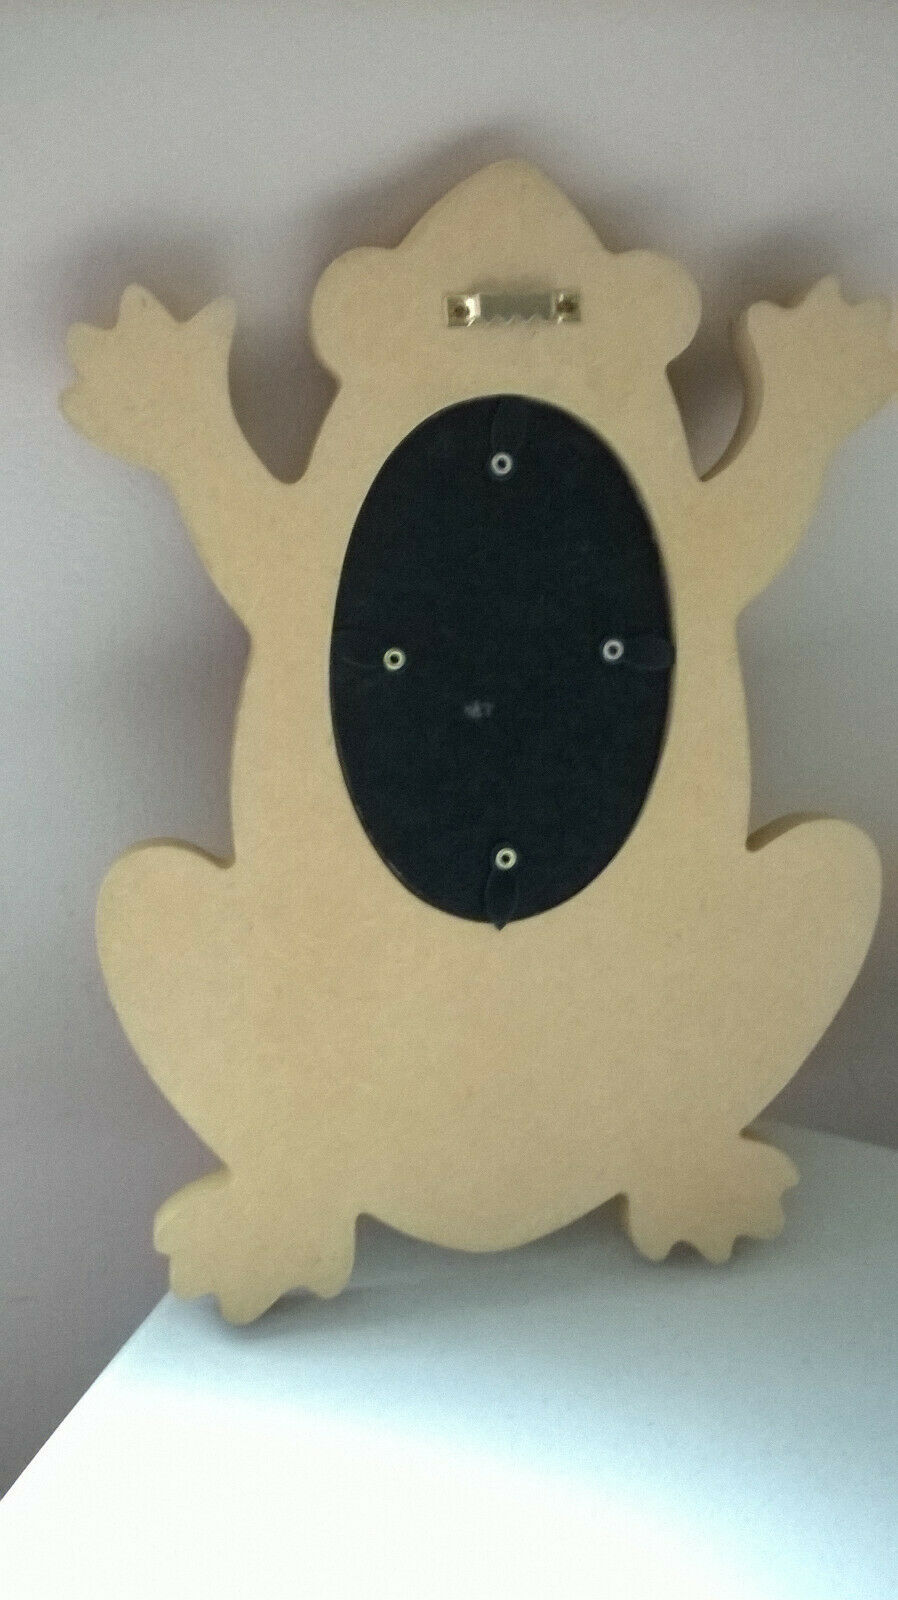 SONOMA WOODEN FROG WALL FRAME W/HANGING COAT, ETC. HOOK 11.25" FITS 3.5x5 PHOTO - $9.89